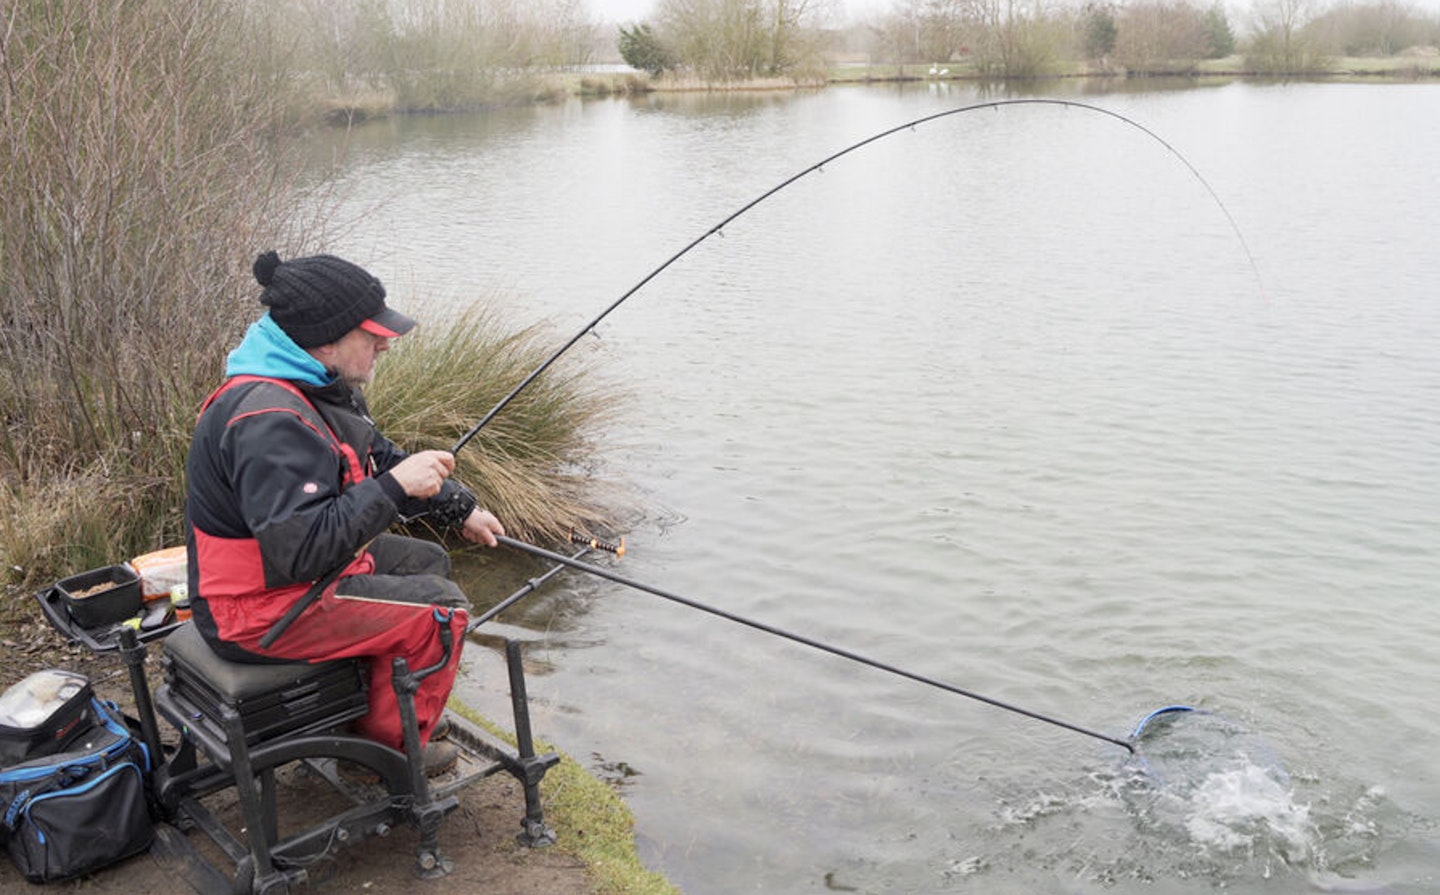 It has enough machismo to cope with larger carp when they do turn up